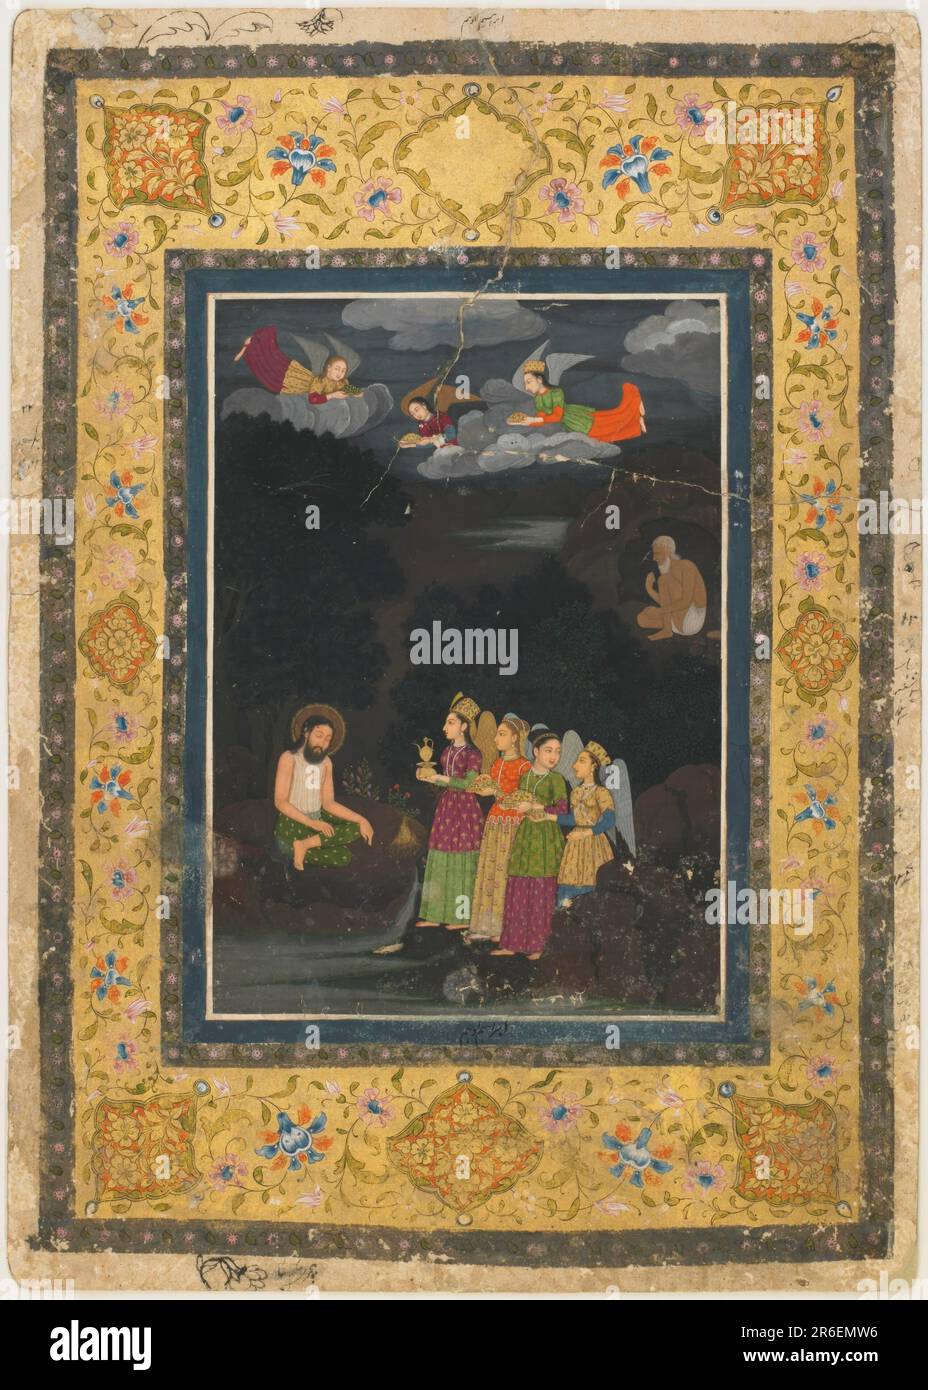 Ibrahim Ibn Adham fed by angels in the wilderness. Damaged. Color and gold. Gold mount with floral arabesques; floral designs on reverse, and writing. Date: early 18th century. Origin: India. Period: Mughal dynasty. Opaque watercolor and gold on paper. Museum: Freer Gallery of Art and Arthur M. Sackler Gallery. Stock Photo